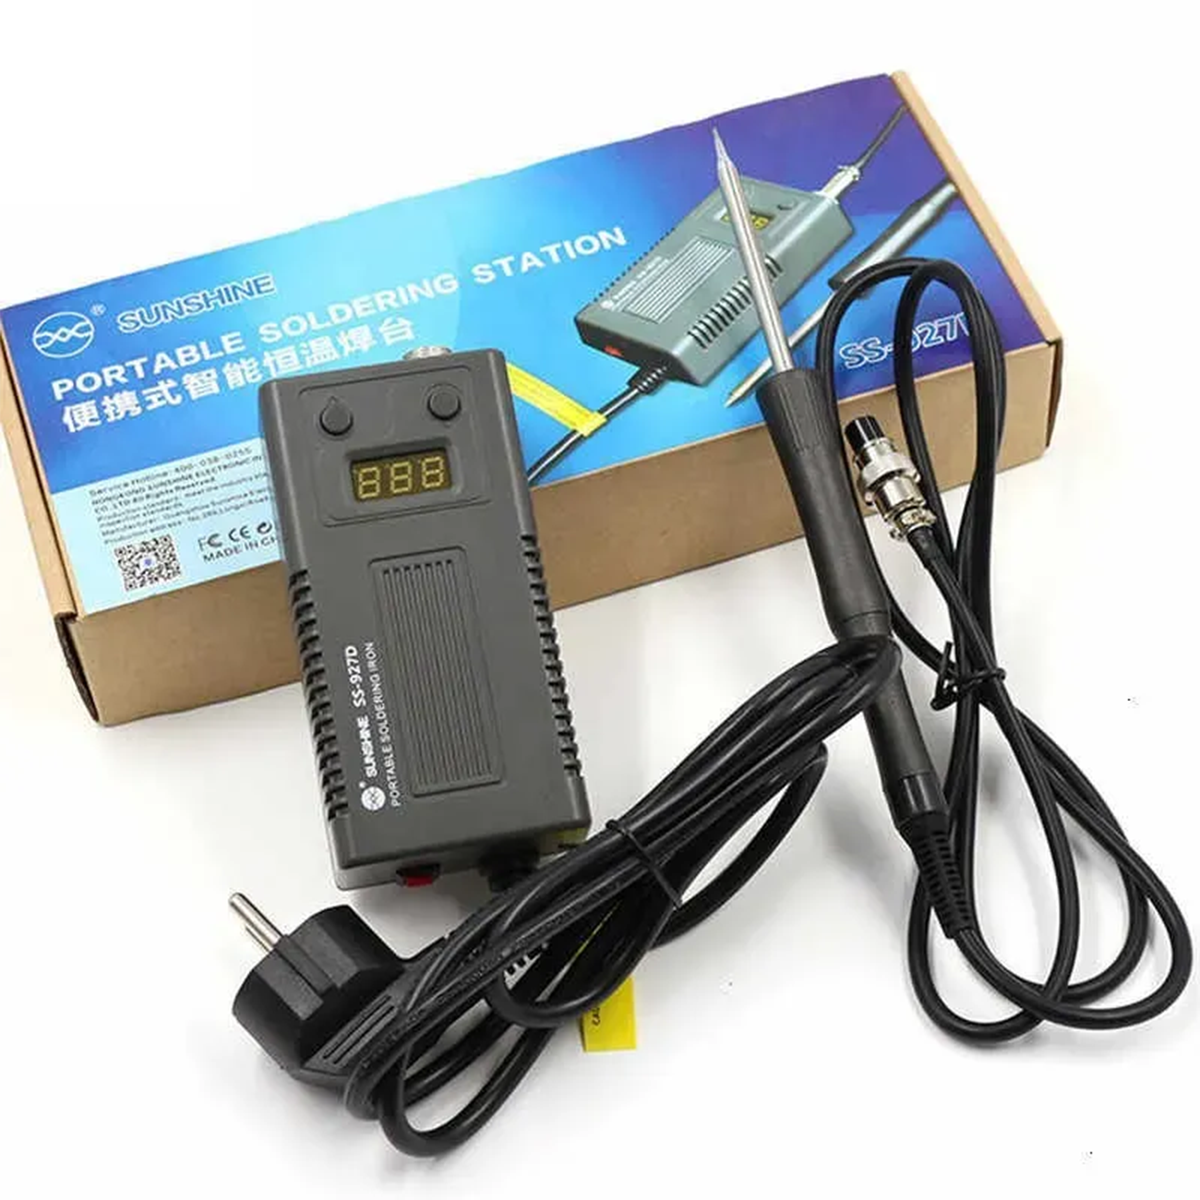 SUNSHINE SS-927D Precision 75w Portable Soldering Iron Station With Digital Display 8 second quick heater